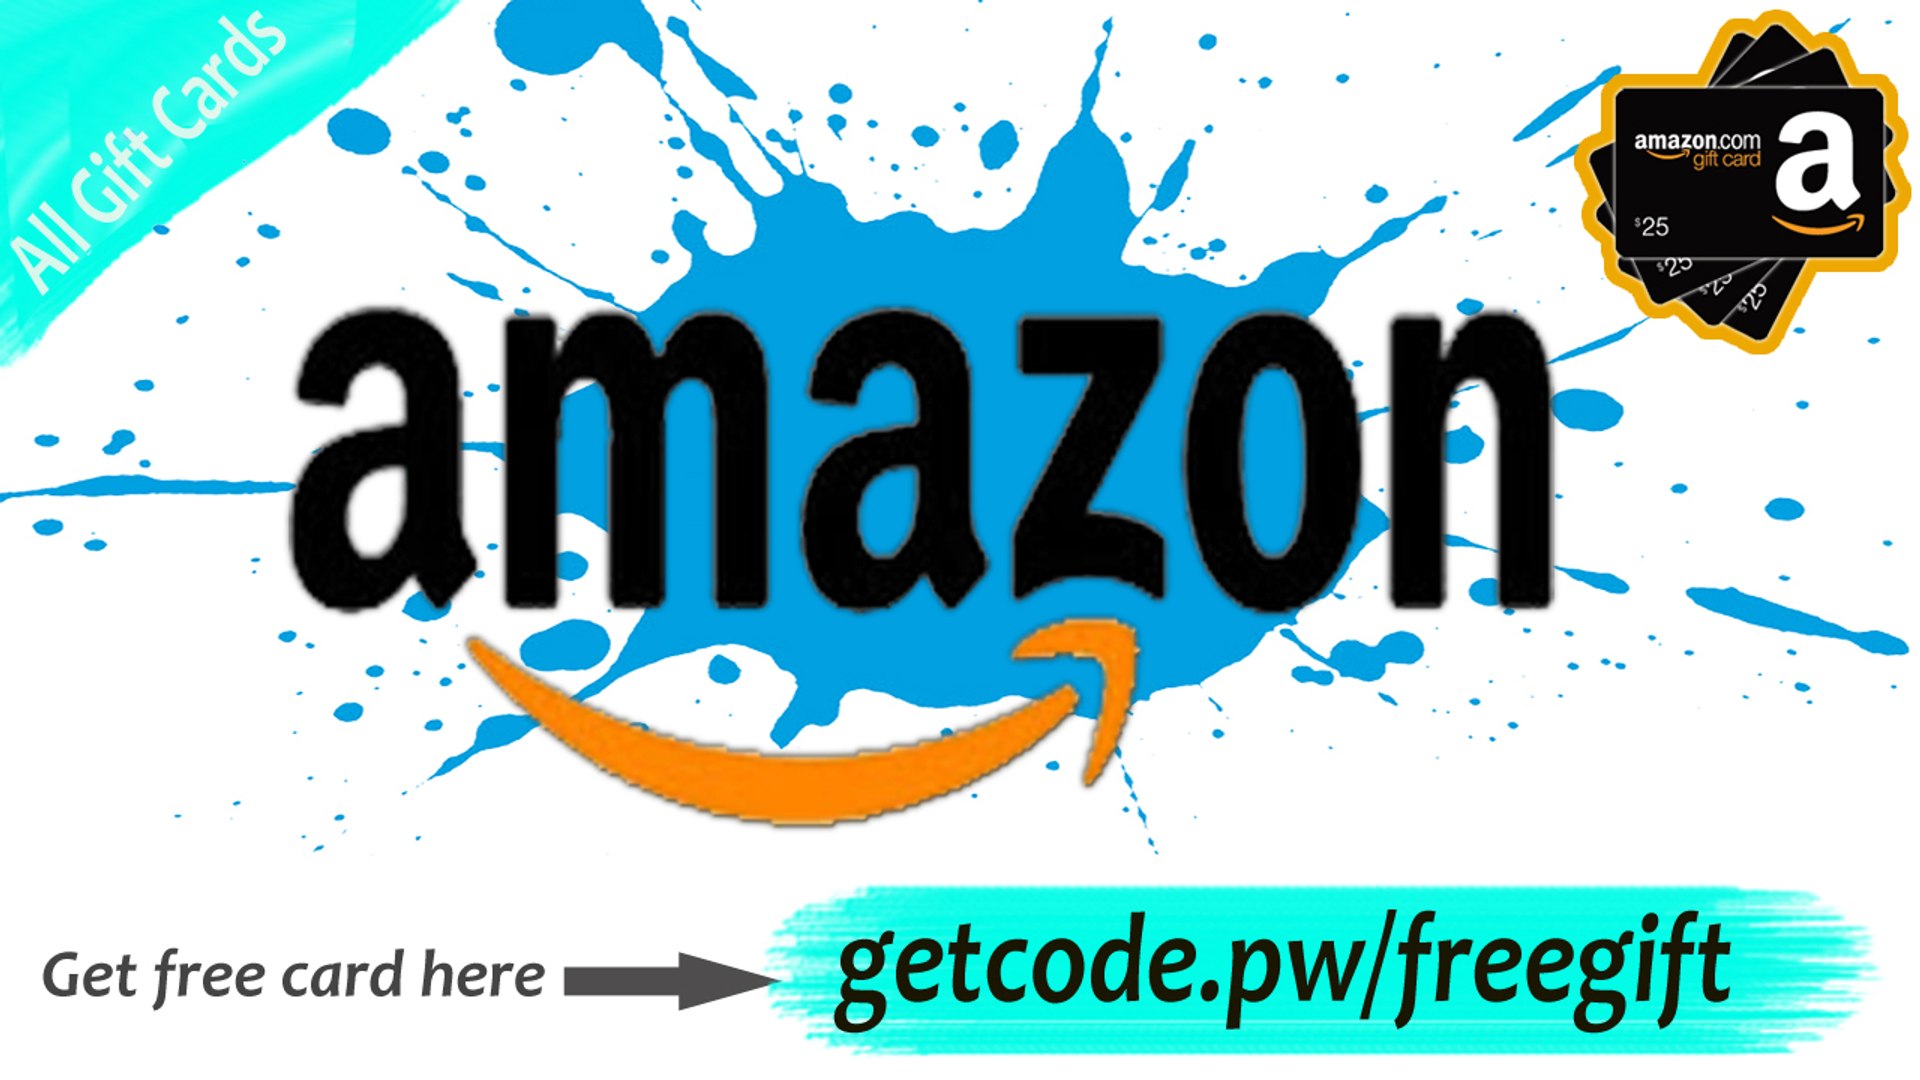 How To Get Free Amazon Gift Card Codes In 5 Minutes Free Amazon Gift Cards Working 100 17 Free Gift Card Codes Video Dailymotion